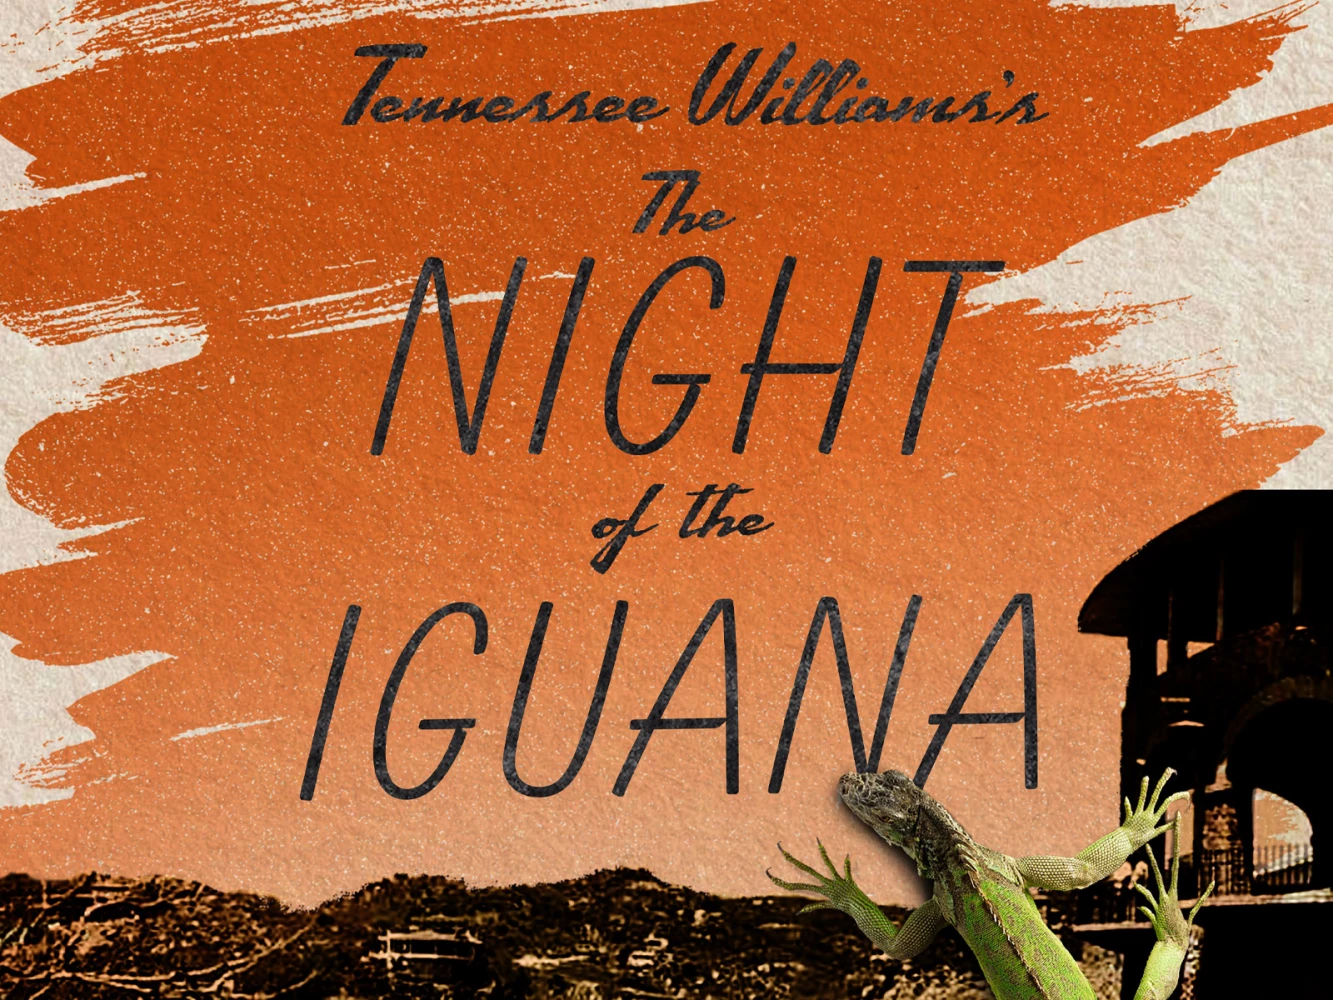 Tennessee Williams's The Night of the Iguana: What to expect - 10